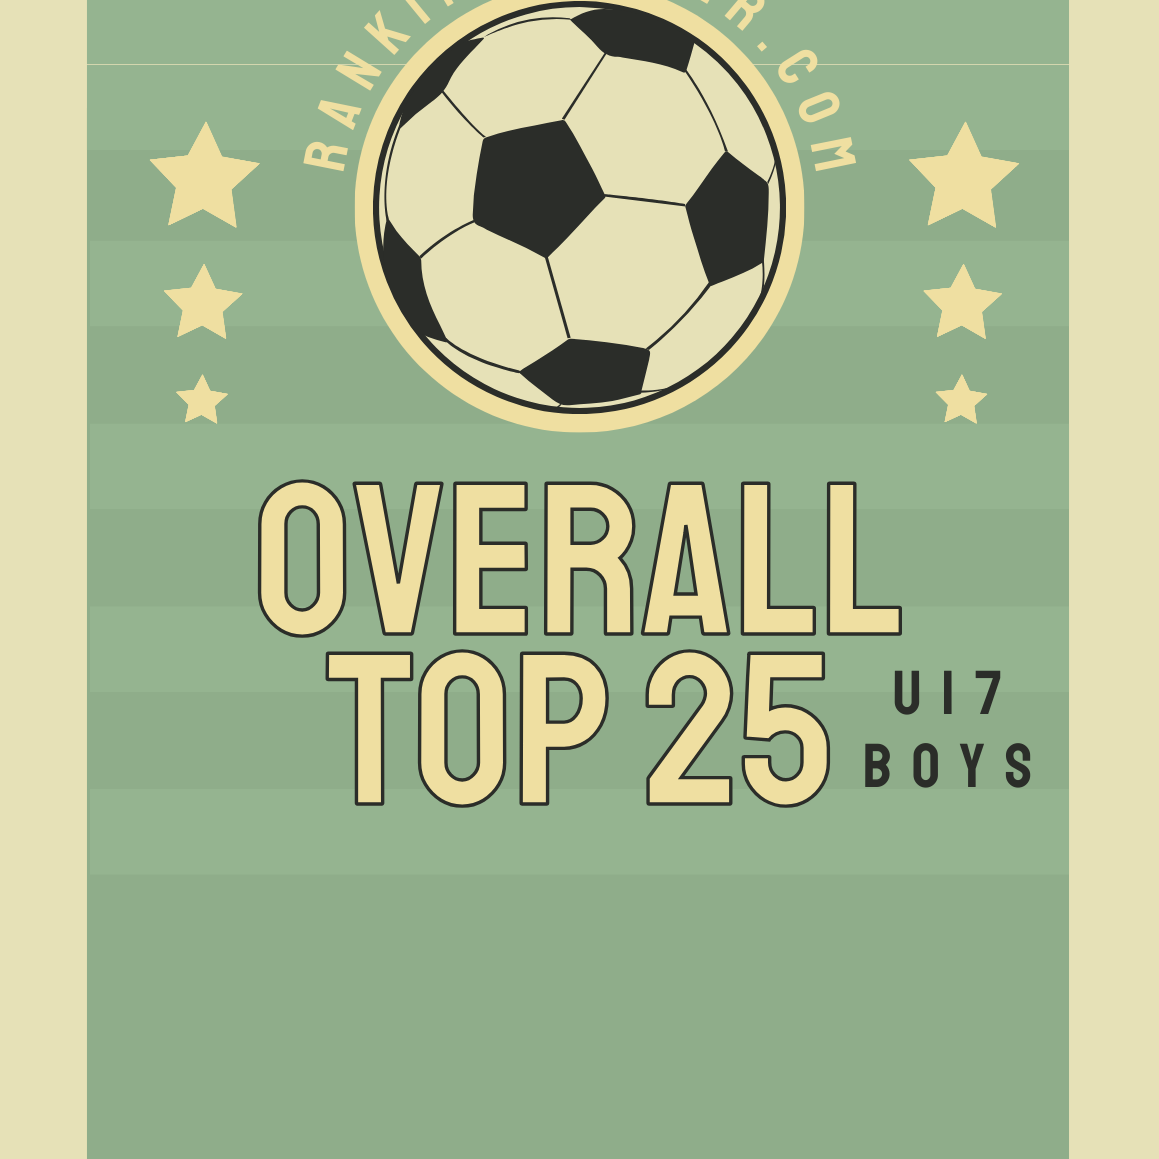 U17 - Overall Boys Top 25 Soccer Rankings - Available Late October